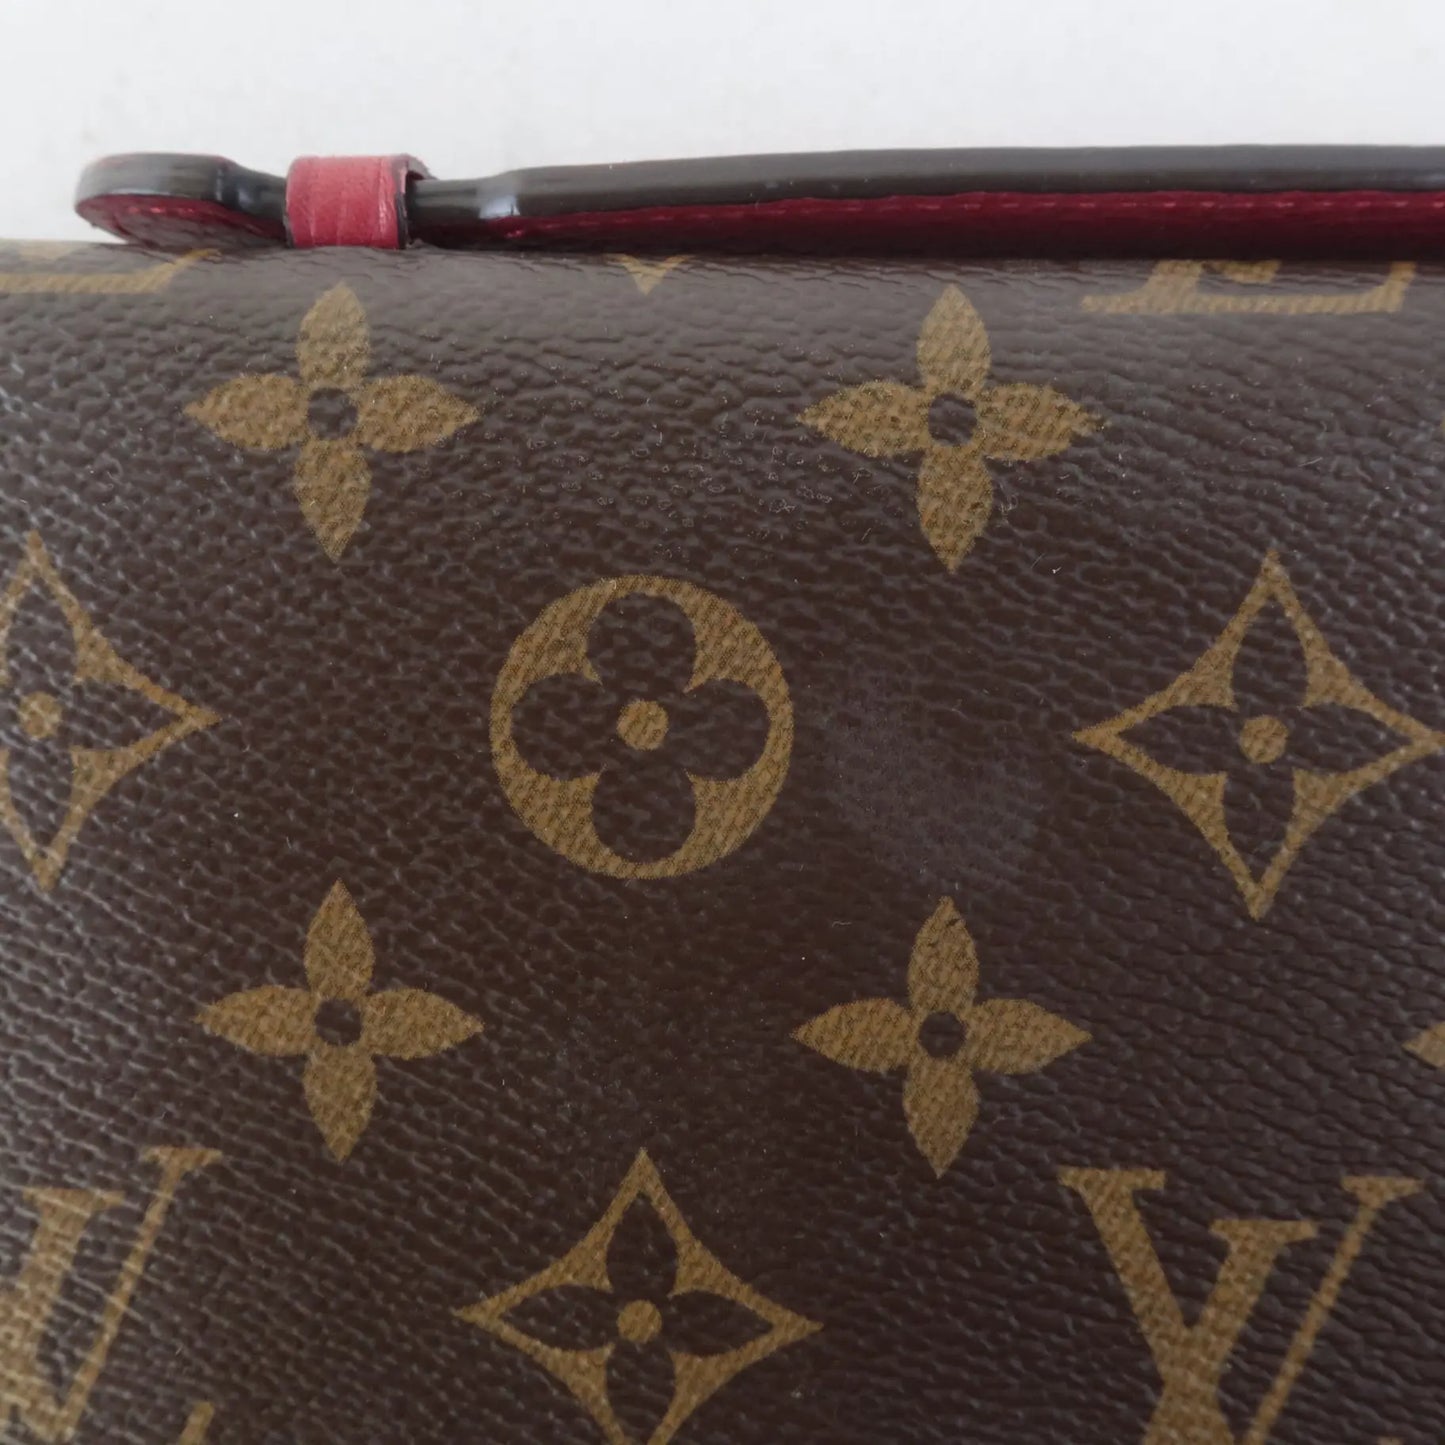 Buy [Used] LOUIS VUITTON Recital Shoulder Bag Monogram M51900 from Japan -  Buy authentic Plus exclusive items from Japan